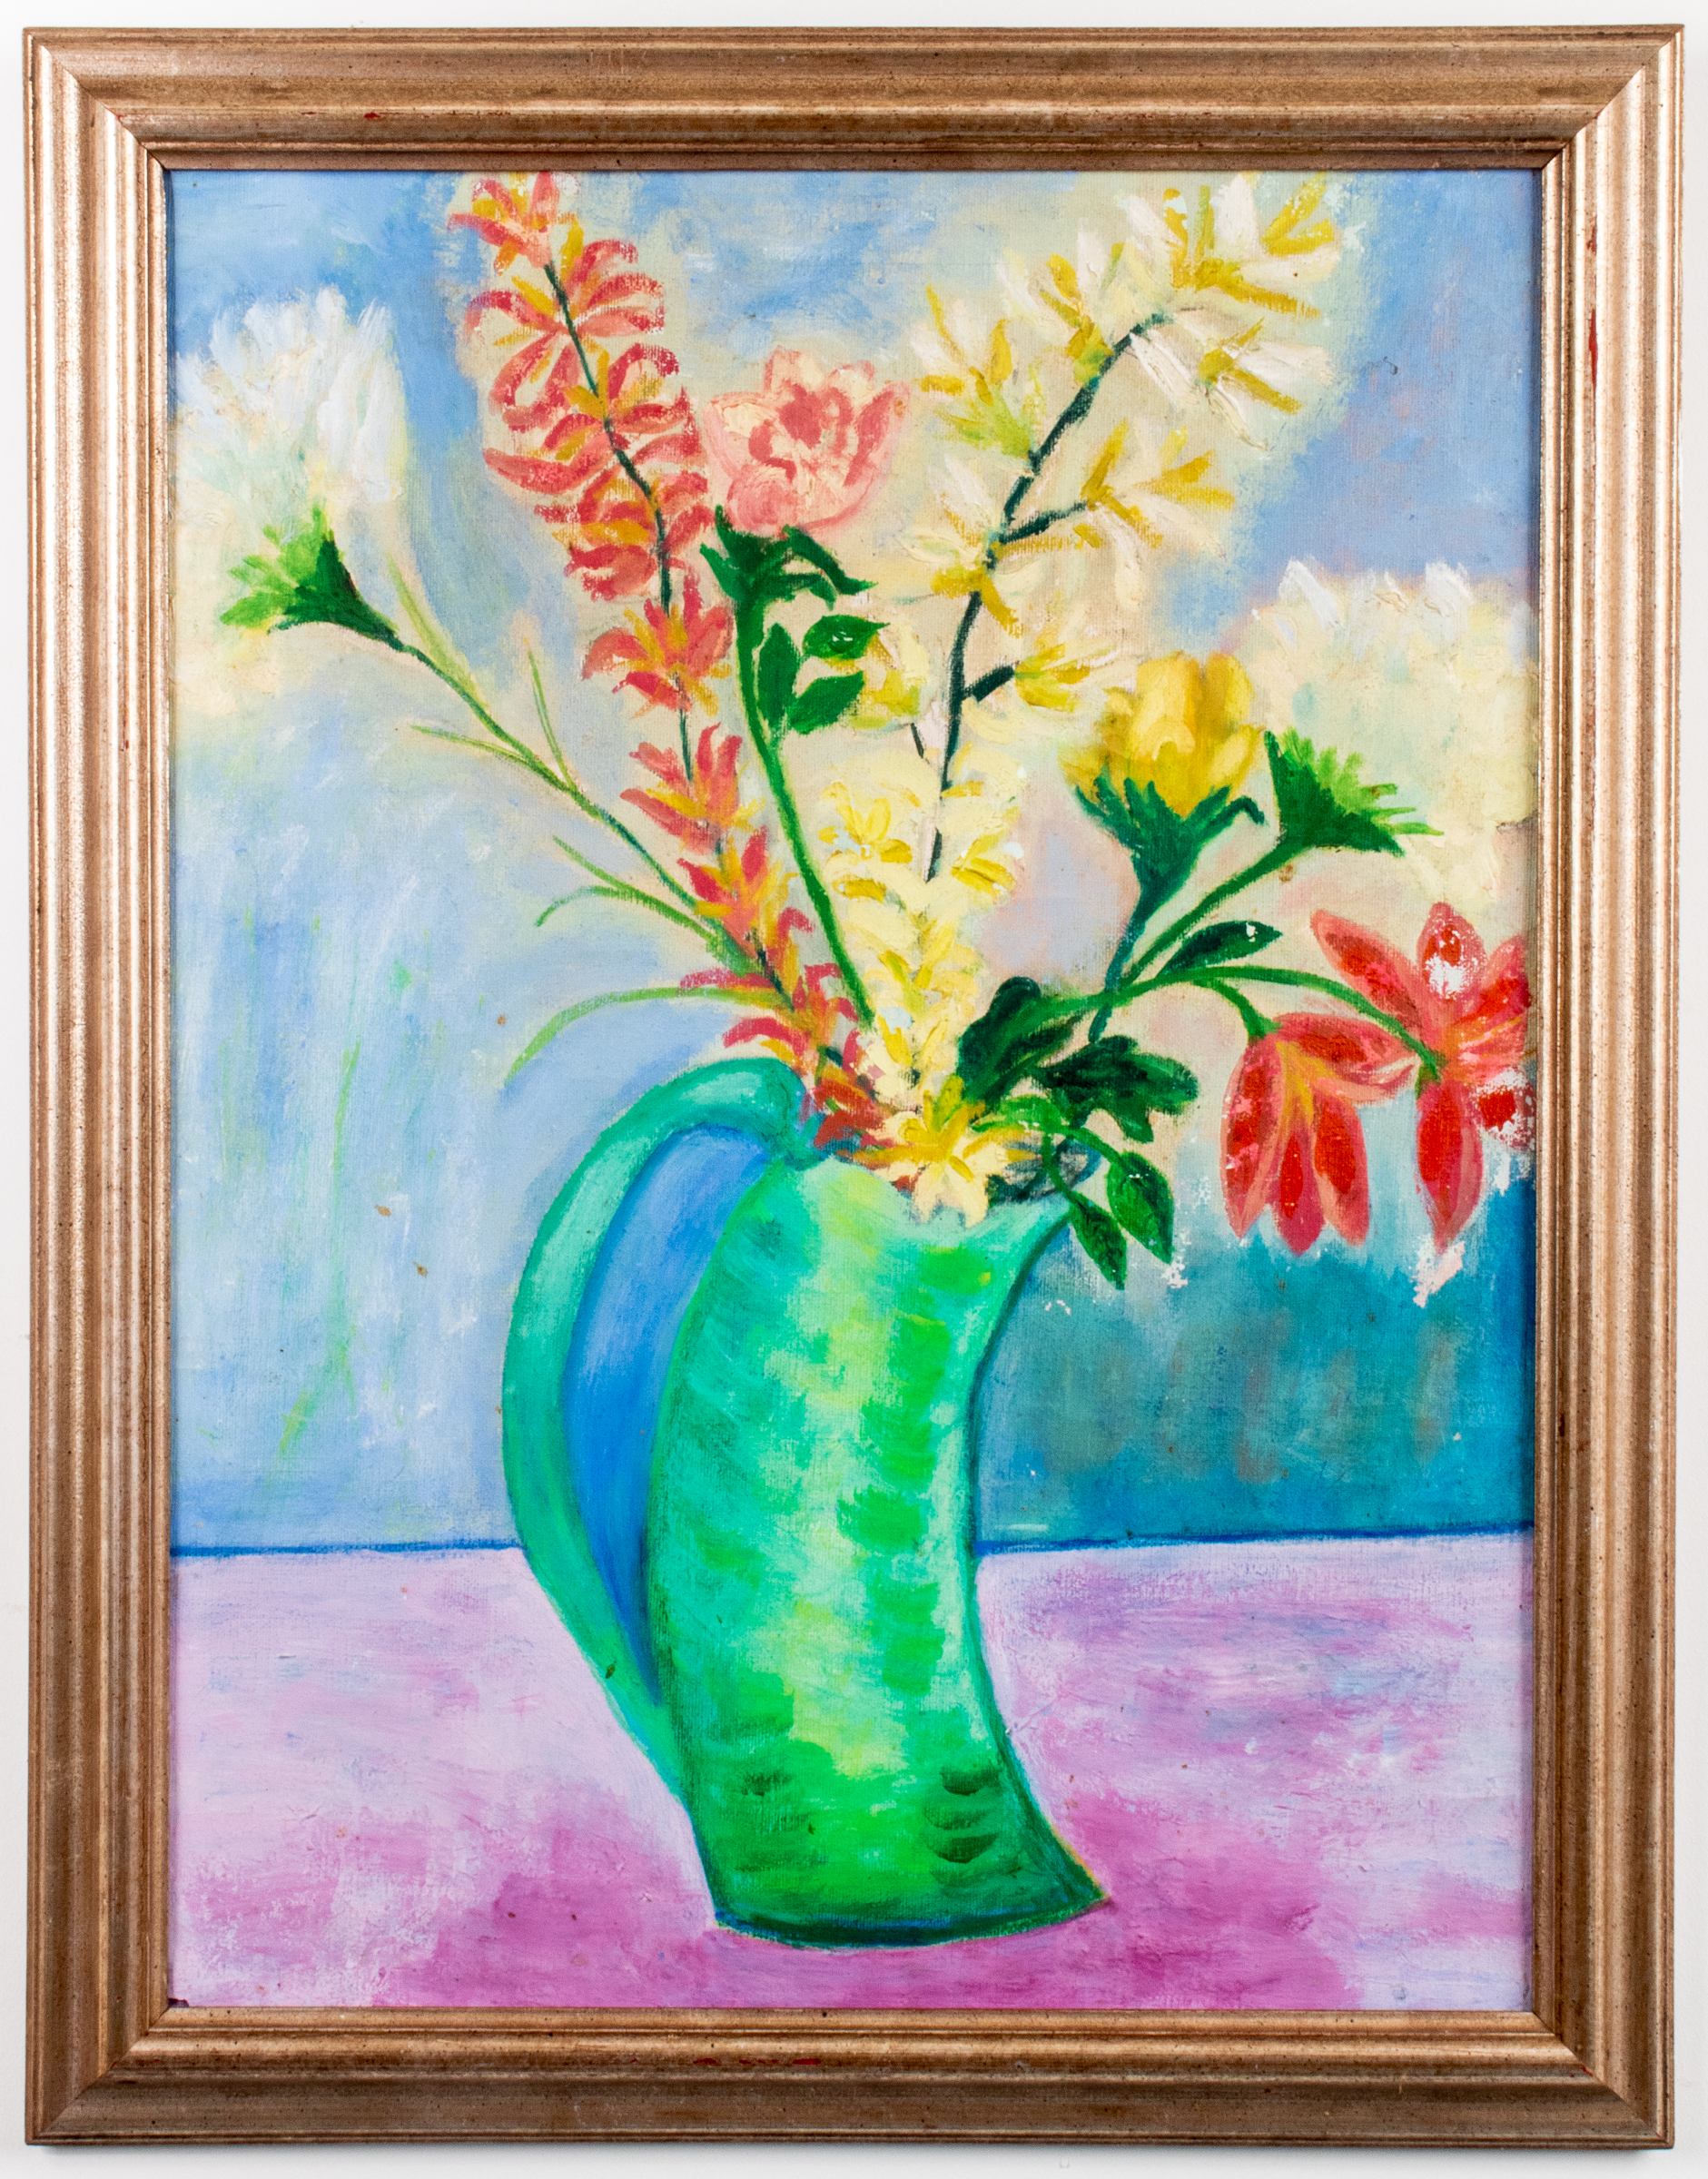 TRUDY HOWARD "FLOWERS" OIL ON CANVAS,